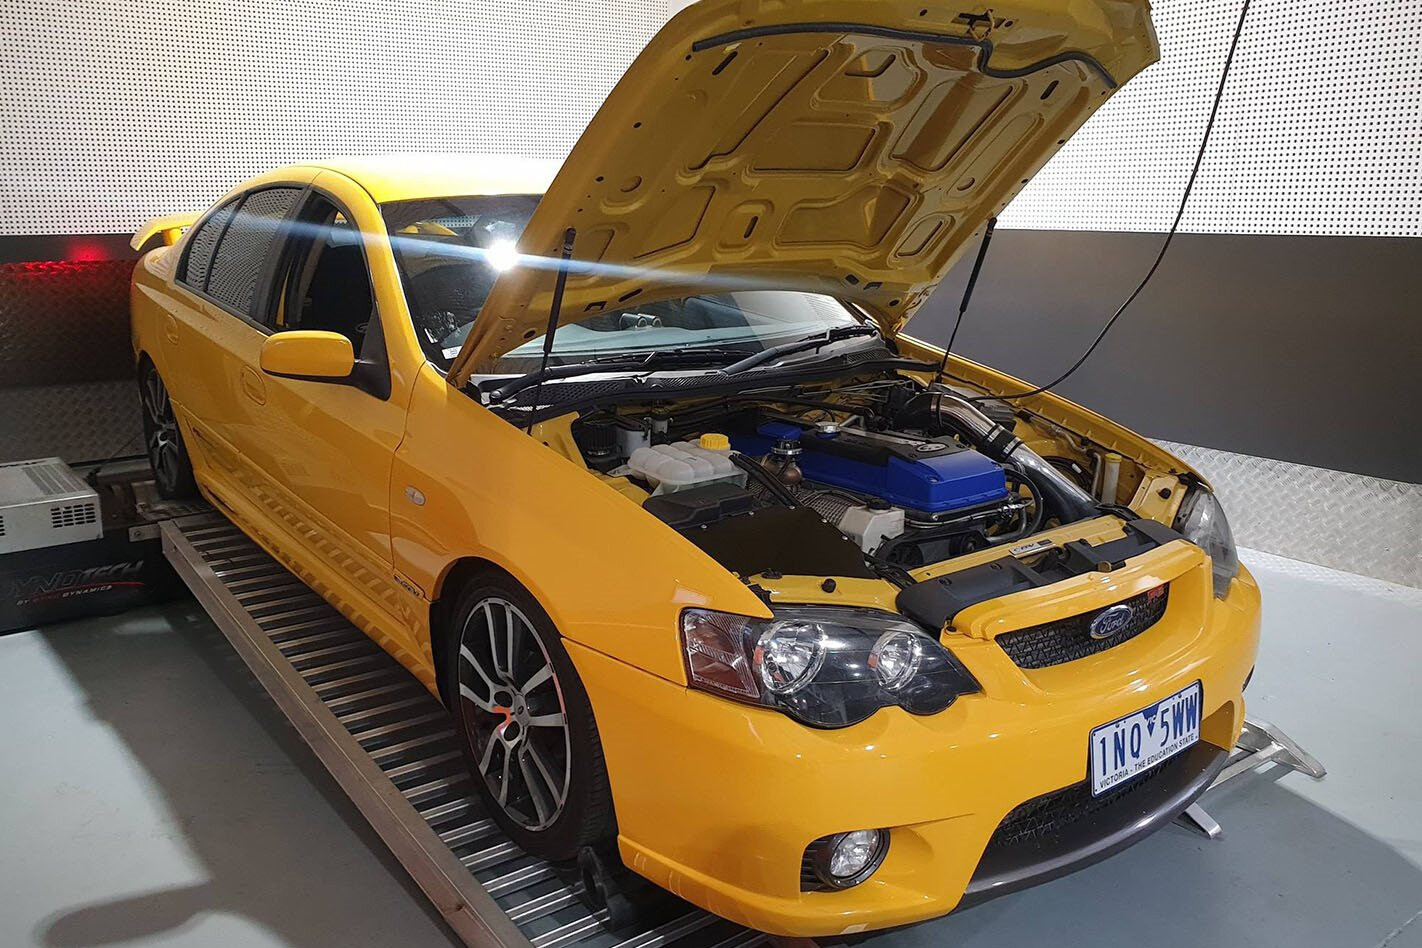 FPV F6 Falcon with LPG engine makes 525kW – Video